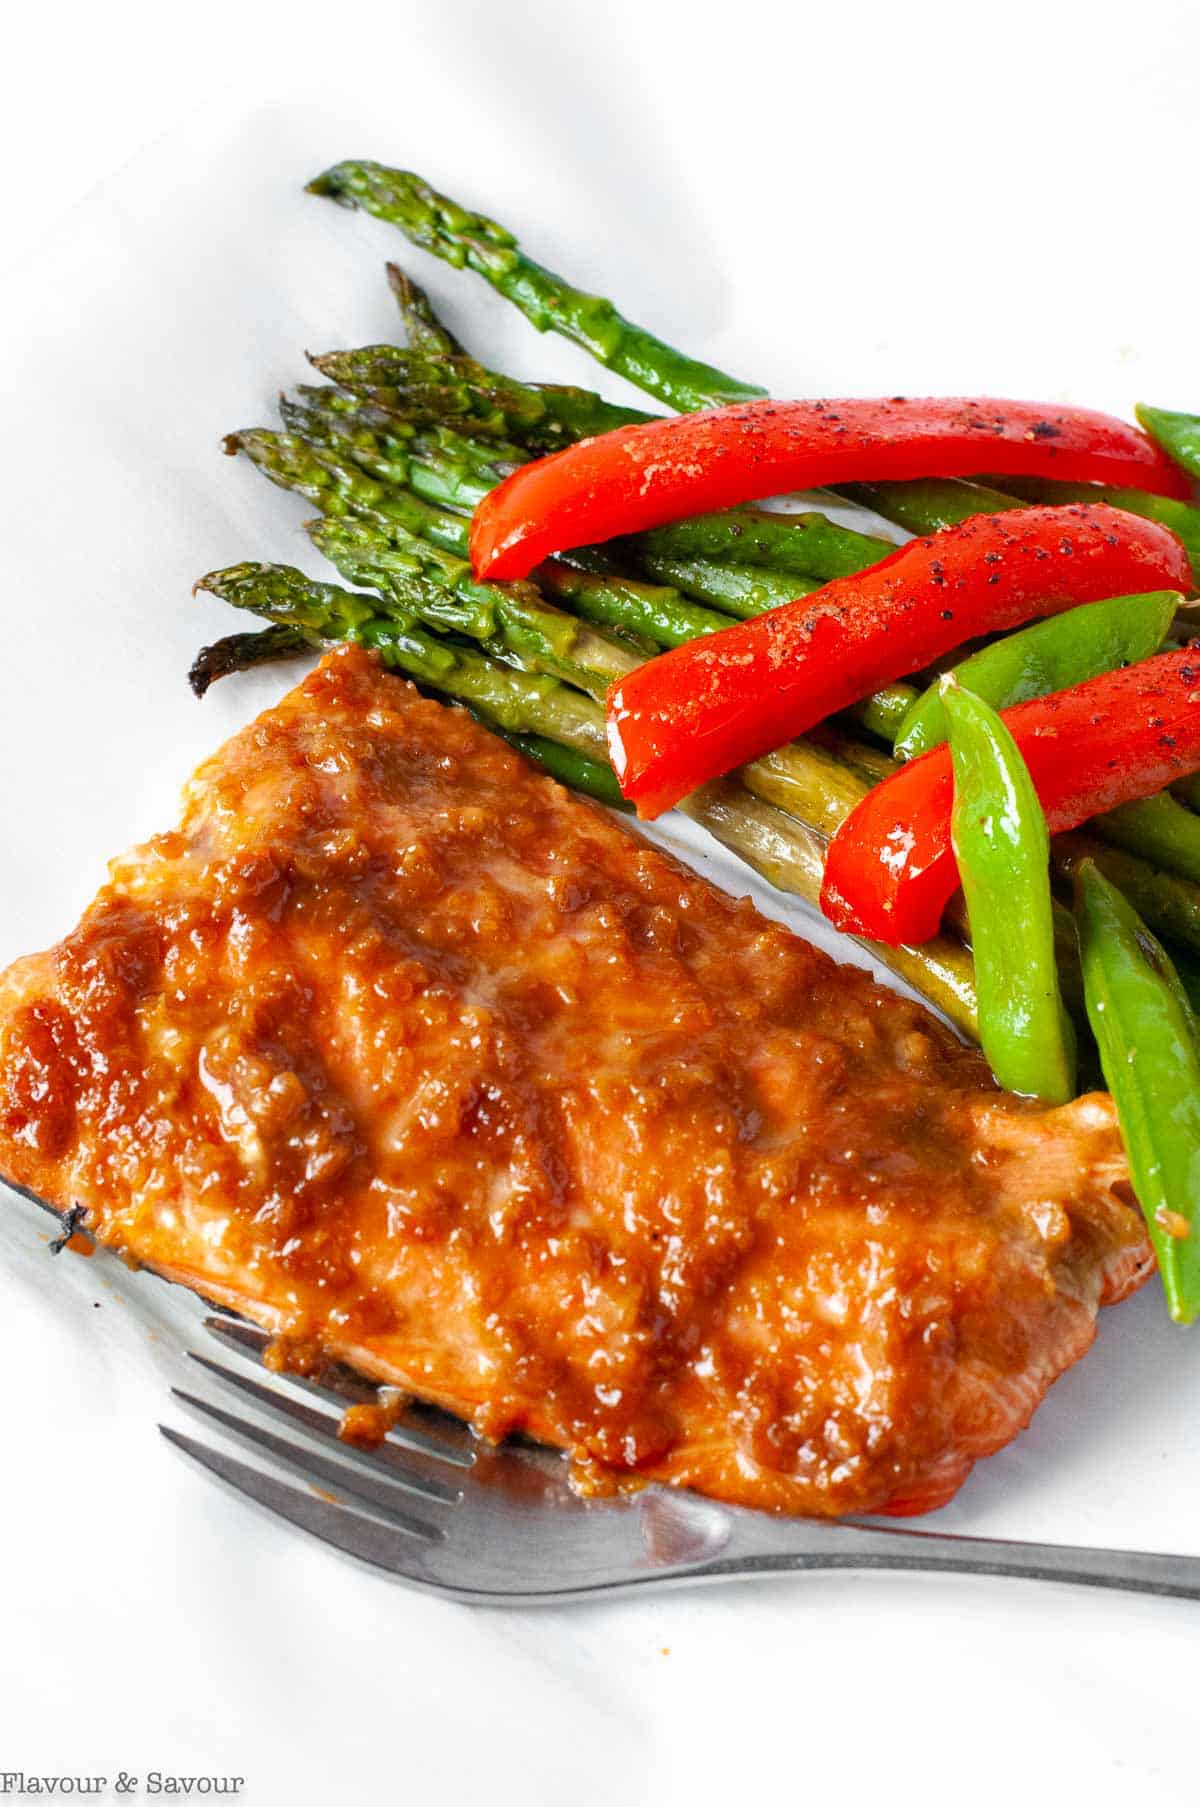 Miso Glazed Salmon fillet with asparagus, snow peas and red peppers in a foil packet.